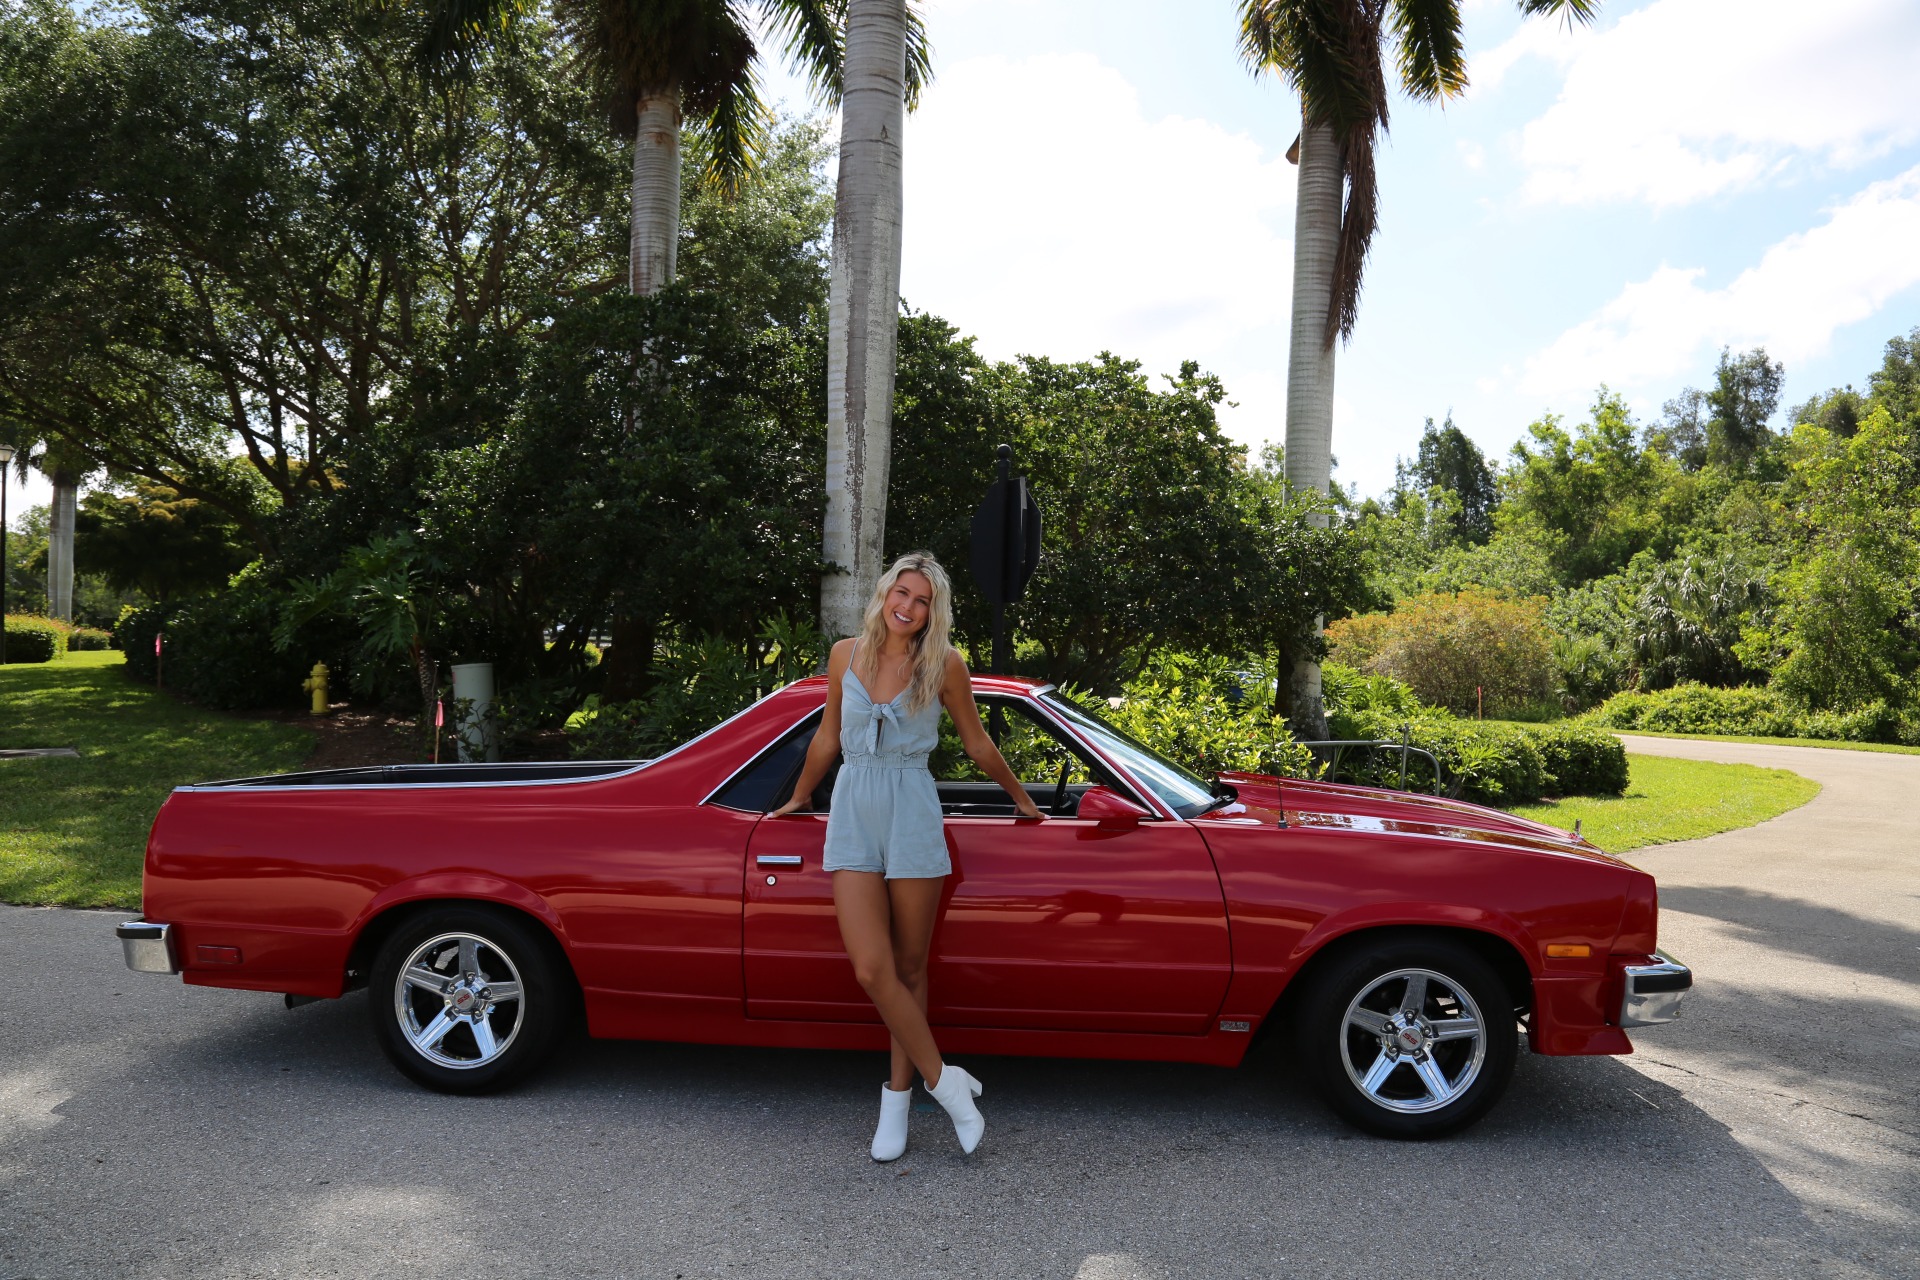 Used 1986 GMC Caballero LS Corvette Swap for sale Sold at Muscle Cars for Sale Inc. in Fort Myers FL 33912 1